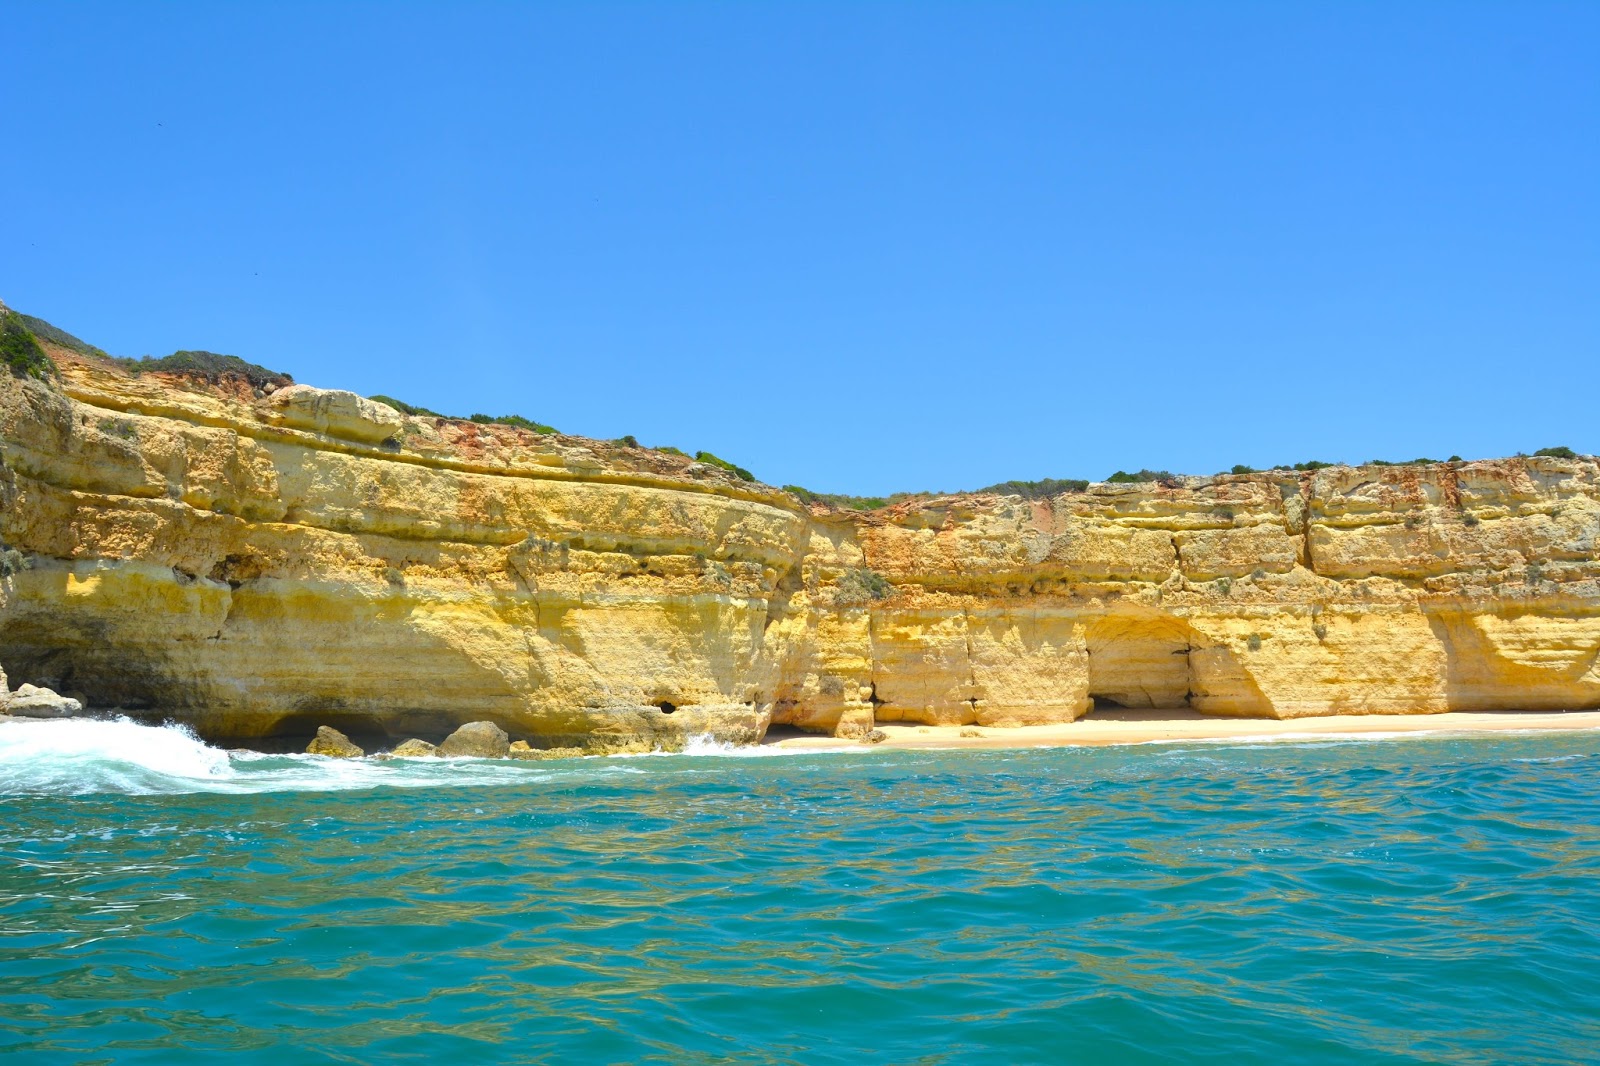 In this photo, you will see golden cliffs and turquoise waters. It was taken in the region of Algarve in Portugal known for its gorgeous coastline.